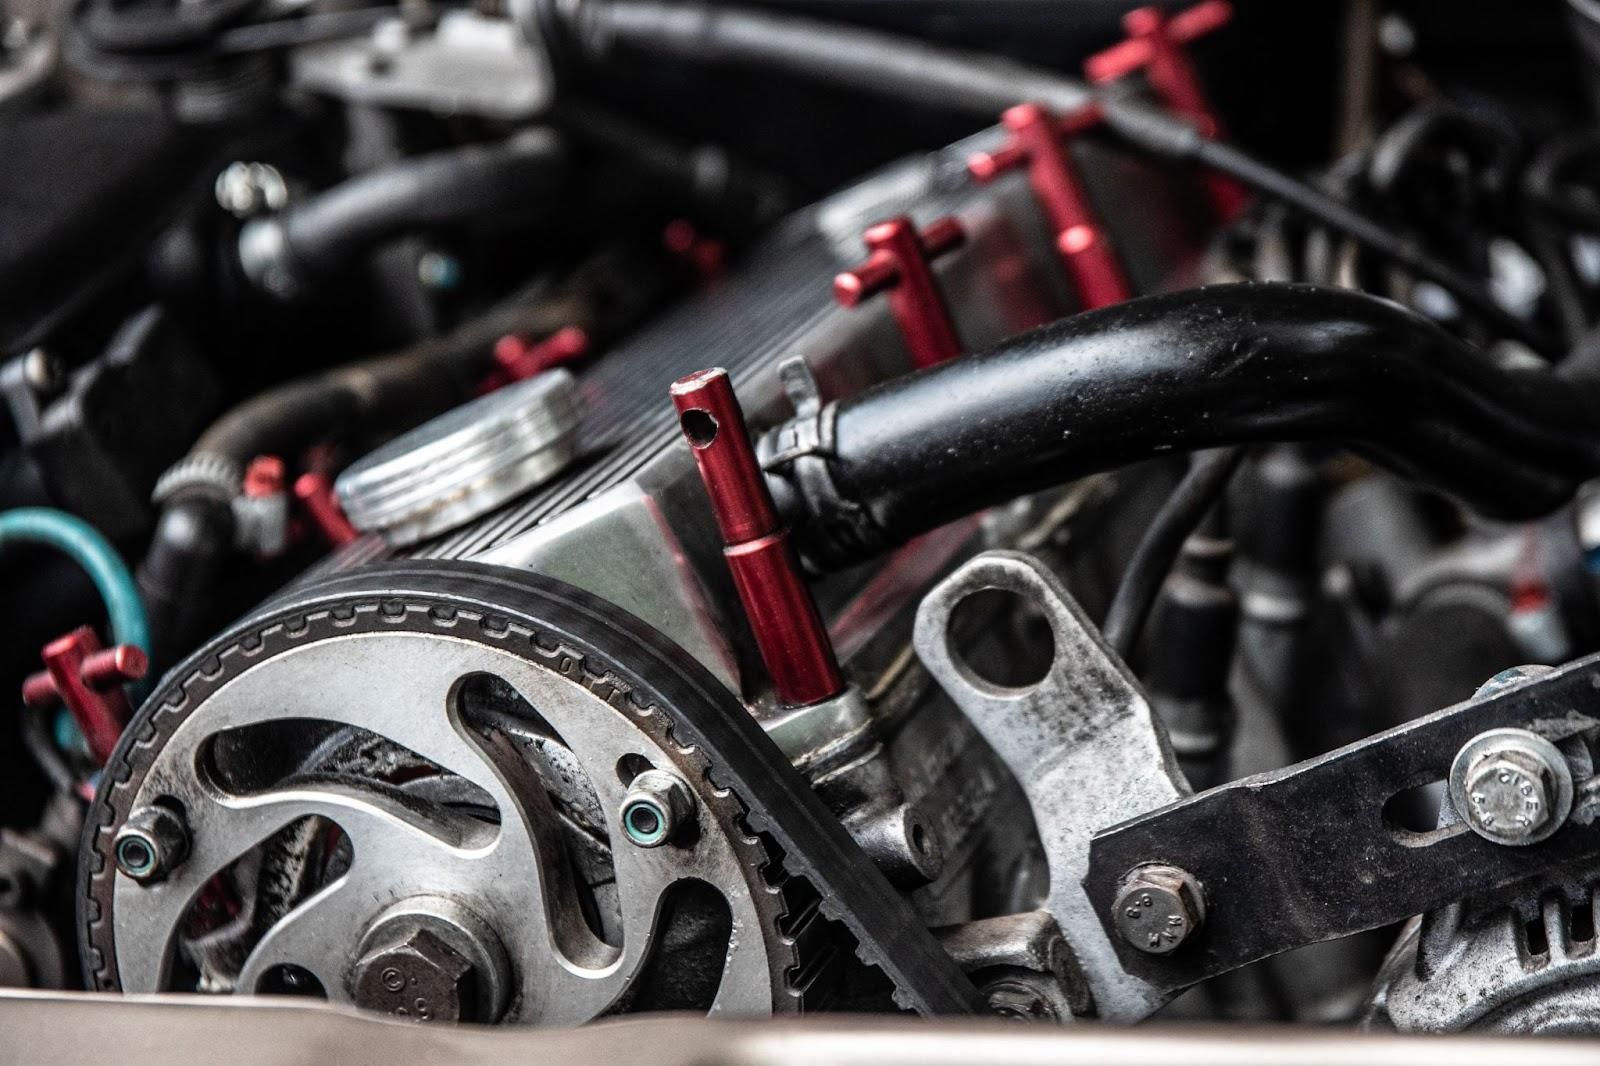 Timing Belt Service at ﻿808 Automotive Inc.﻿ in ﻿Hubbard, OR﻿